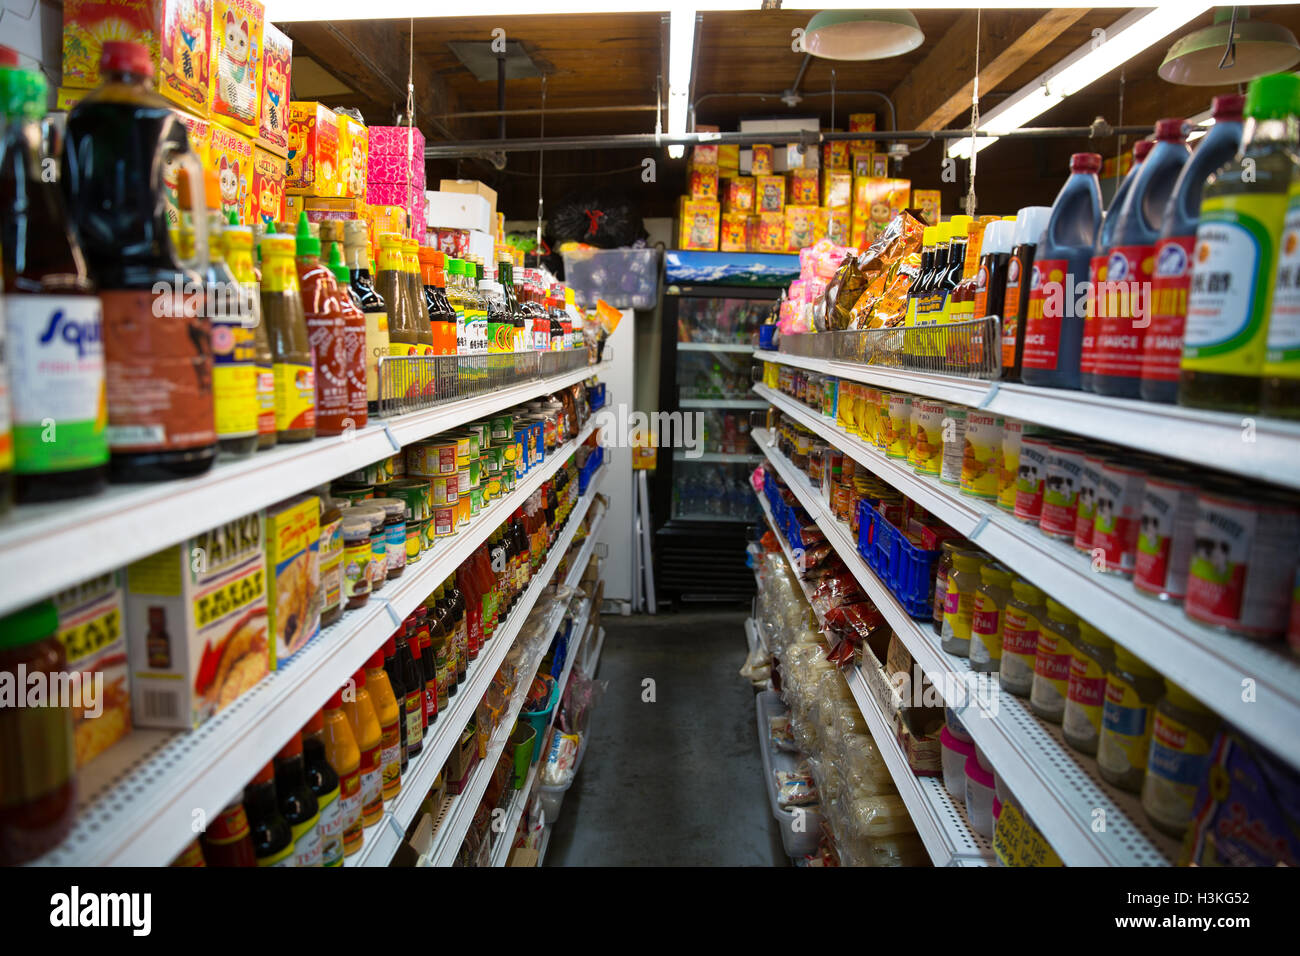 Looking down the aisle inside an ethnic grocery store in Seattle, WA Stock Photo